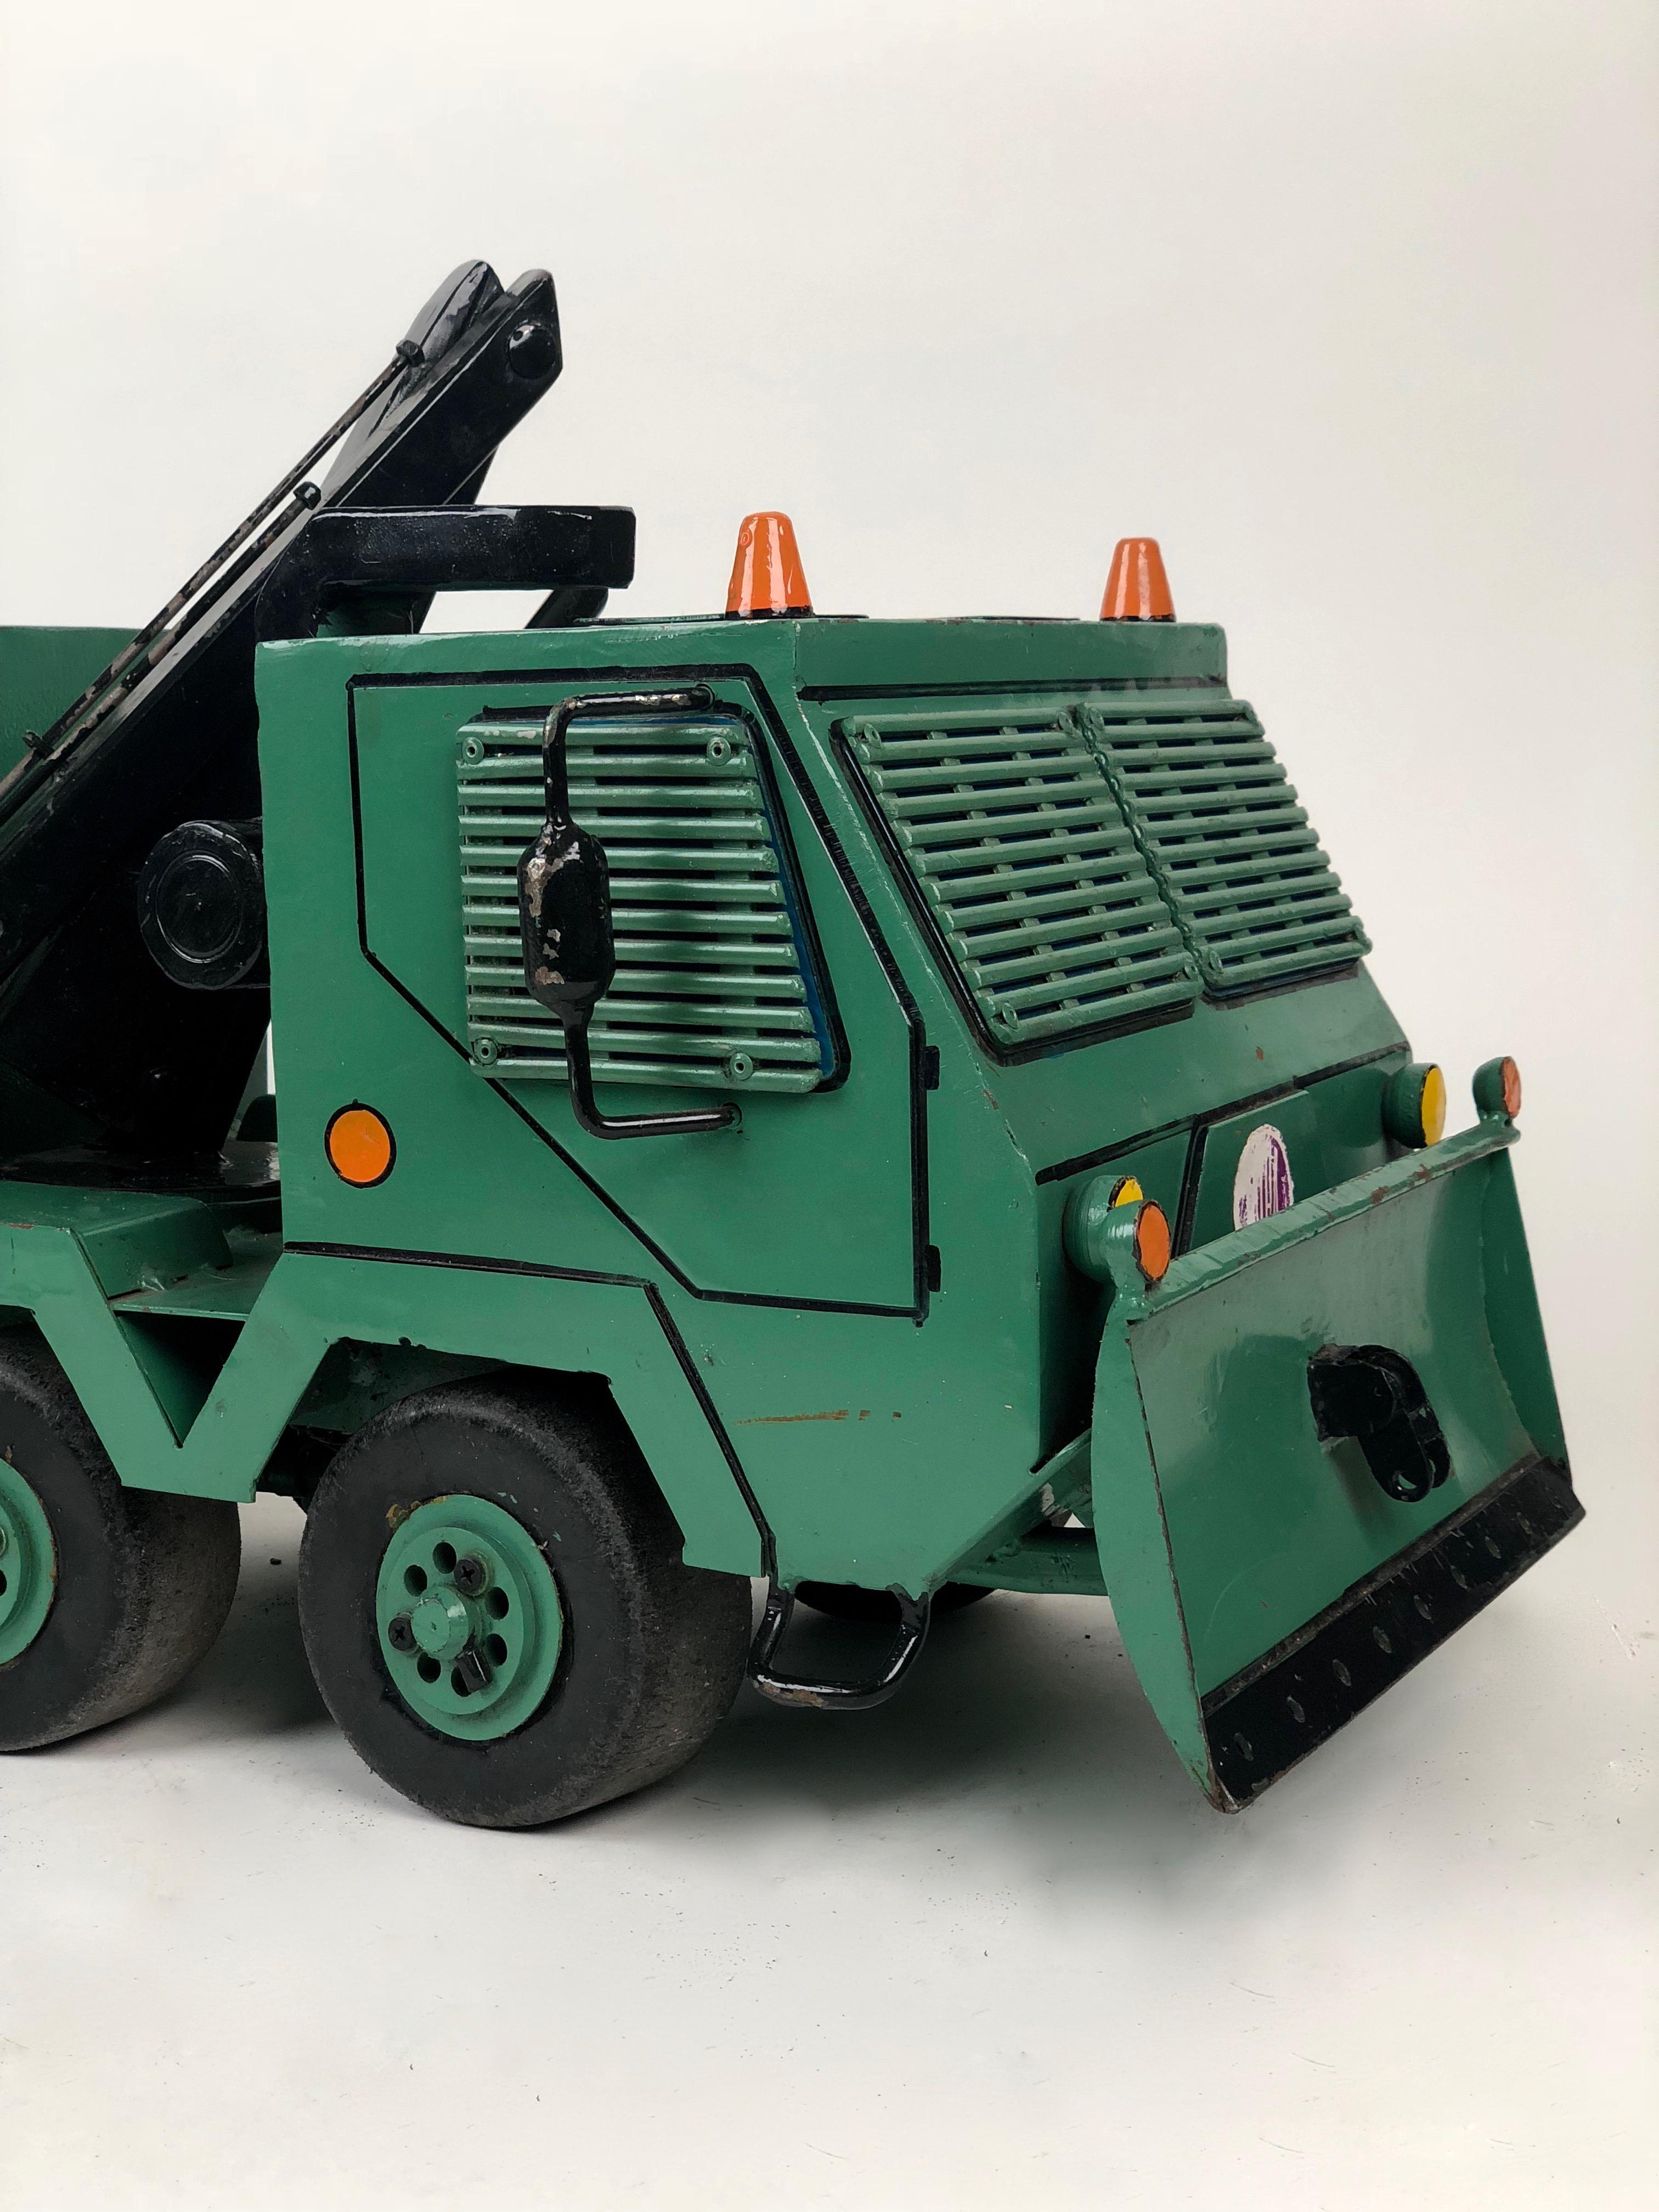 Tara military truck model Grad, large dimension in style. The real model Grad was produced for the delivery of rockets in the 1970s.
The truck is made by a person, who worked his adult life for the company Tatra.
In his retirement he built of all